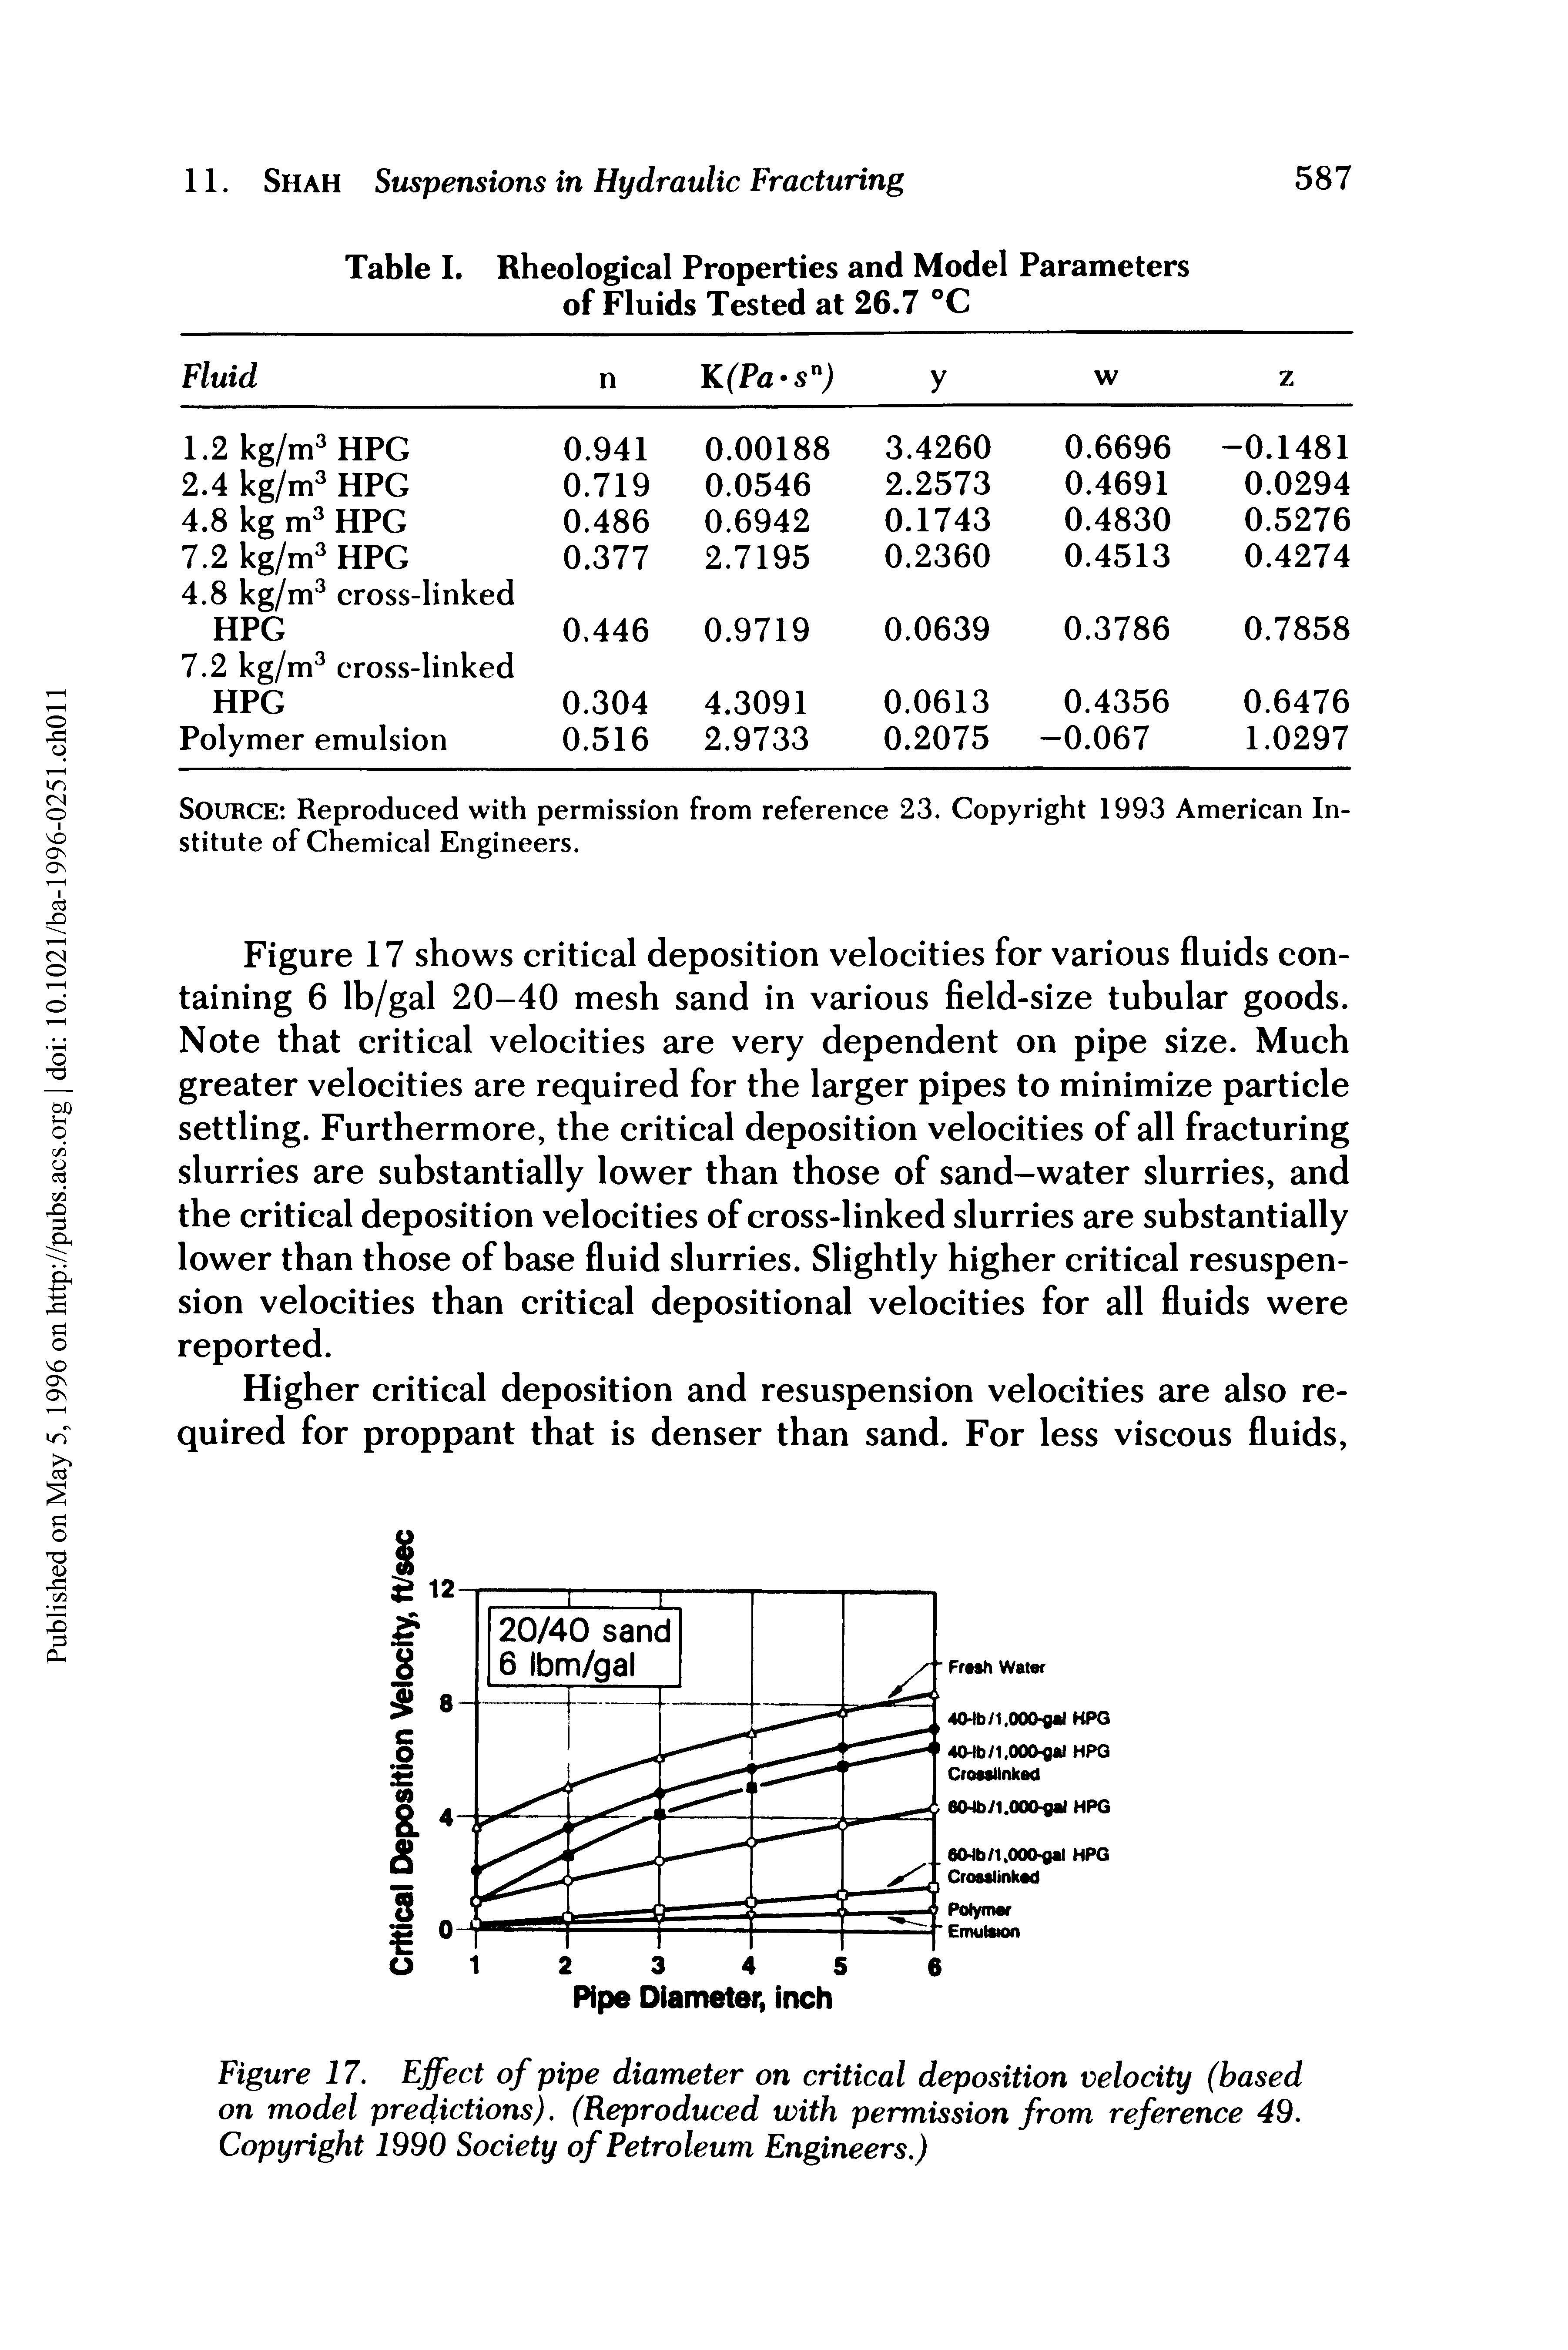 Figure 17. Effect of pipe diameter on critical deposition velocity (based on model predictions). (Reproduced with permission from reference 49. Copyright 1990 Society of Petroleum Engineers.)...